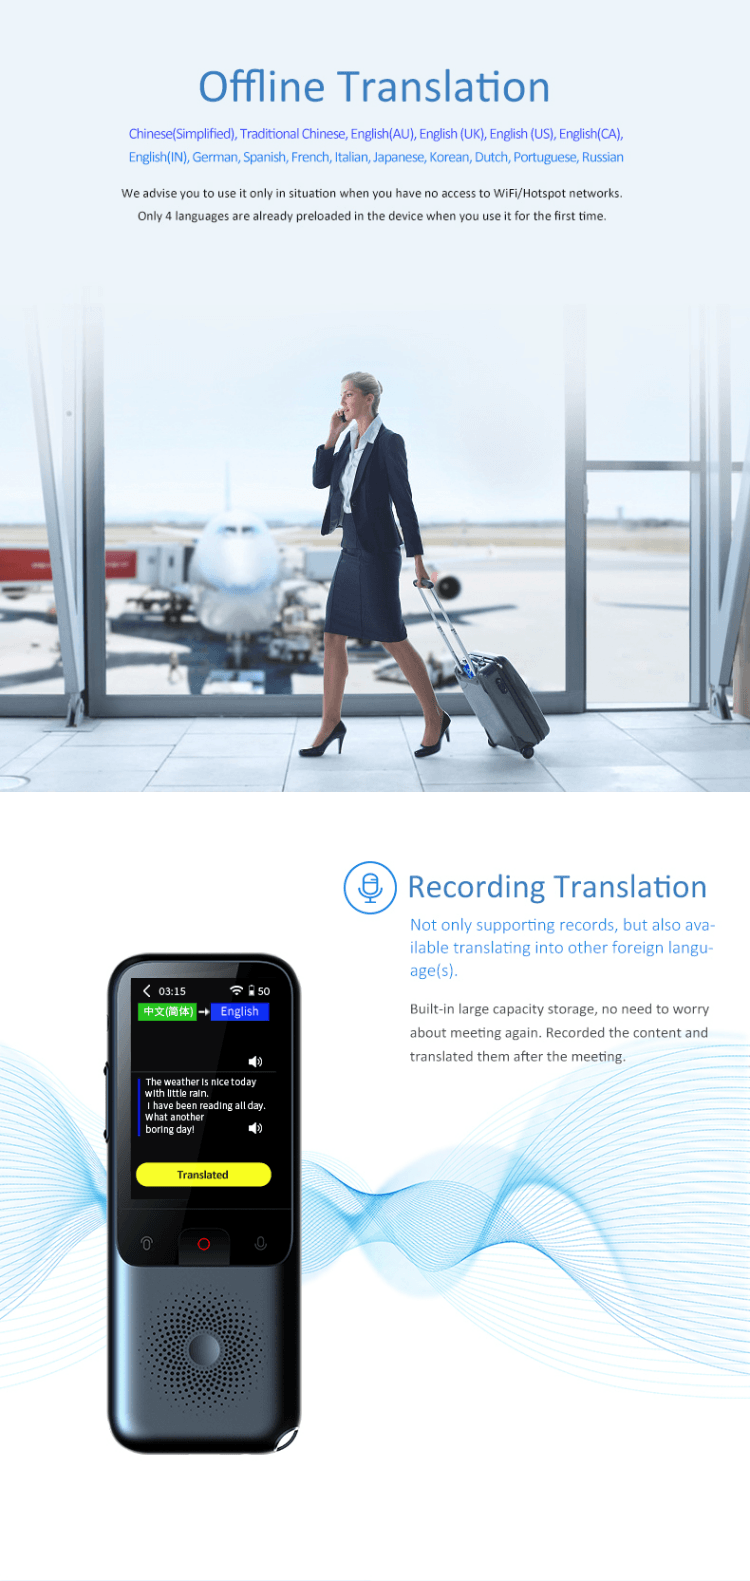 Real Time Language Translator Device 137 Languages, Two Way Portable Instant Translator, Voice/Text/Photo Translation, 3-inch HD Touch Screen Camera